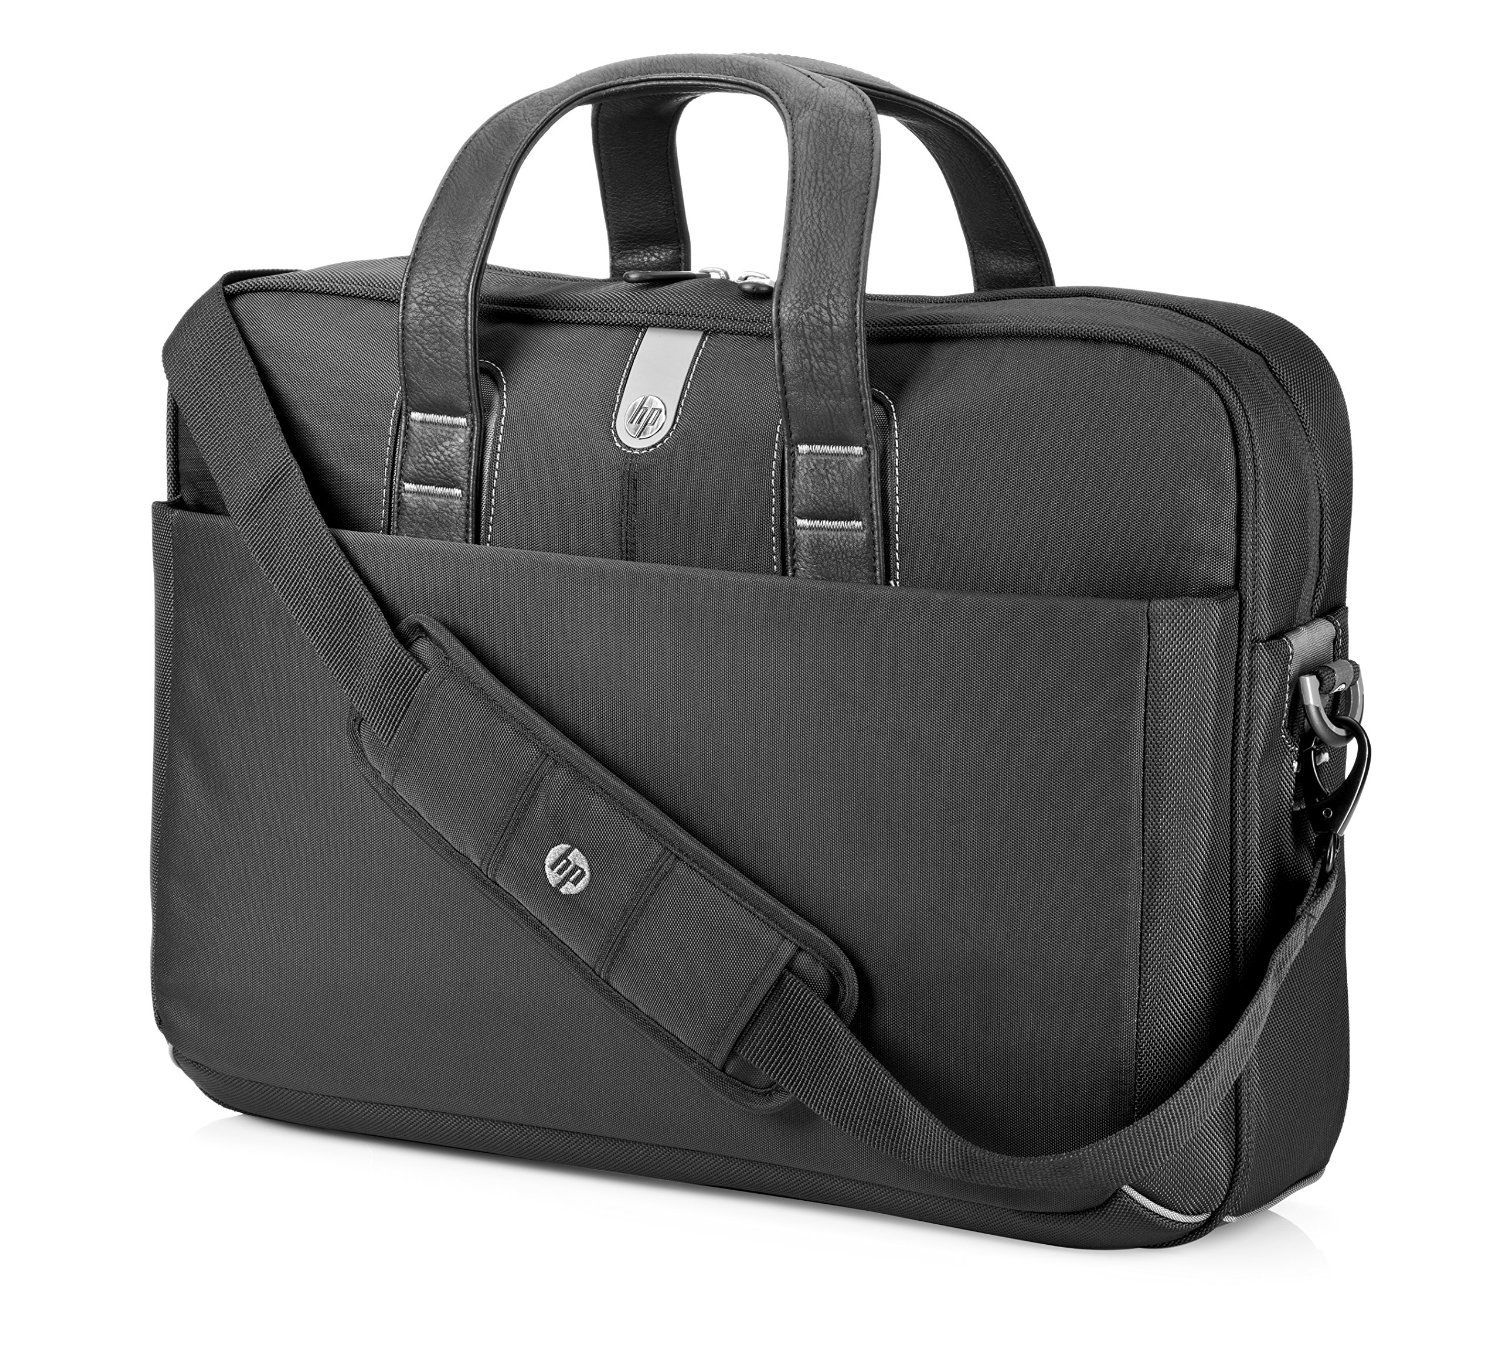 HP Professional Slim Top Load 17.3 inch Laptop Notebook Carry Case Bla only £34.99